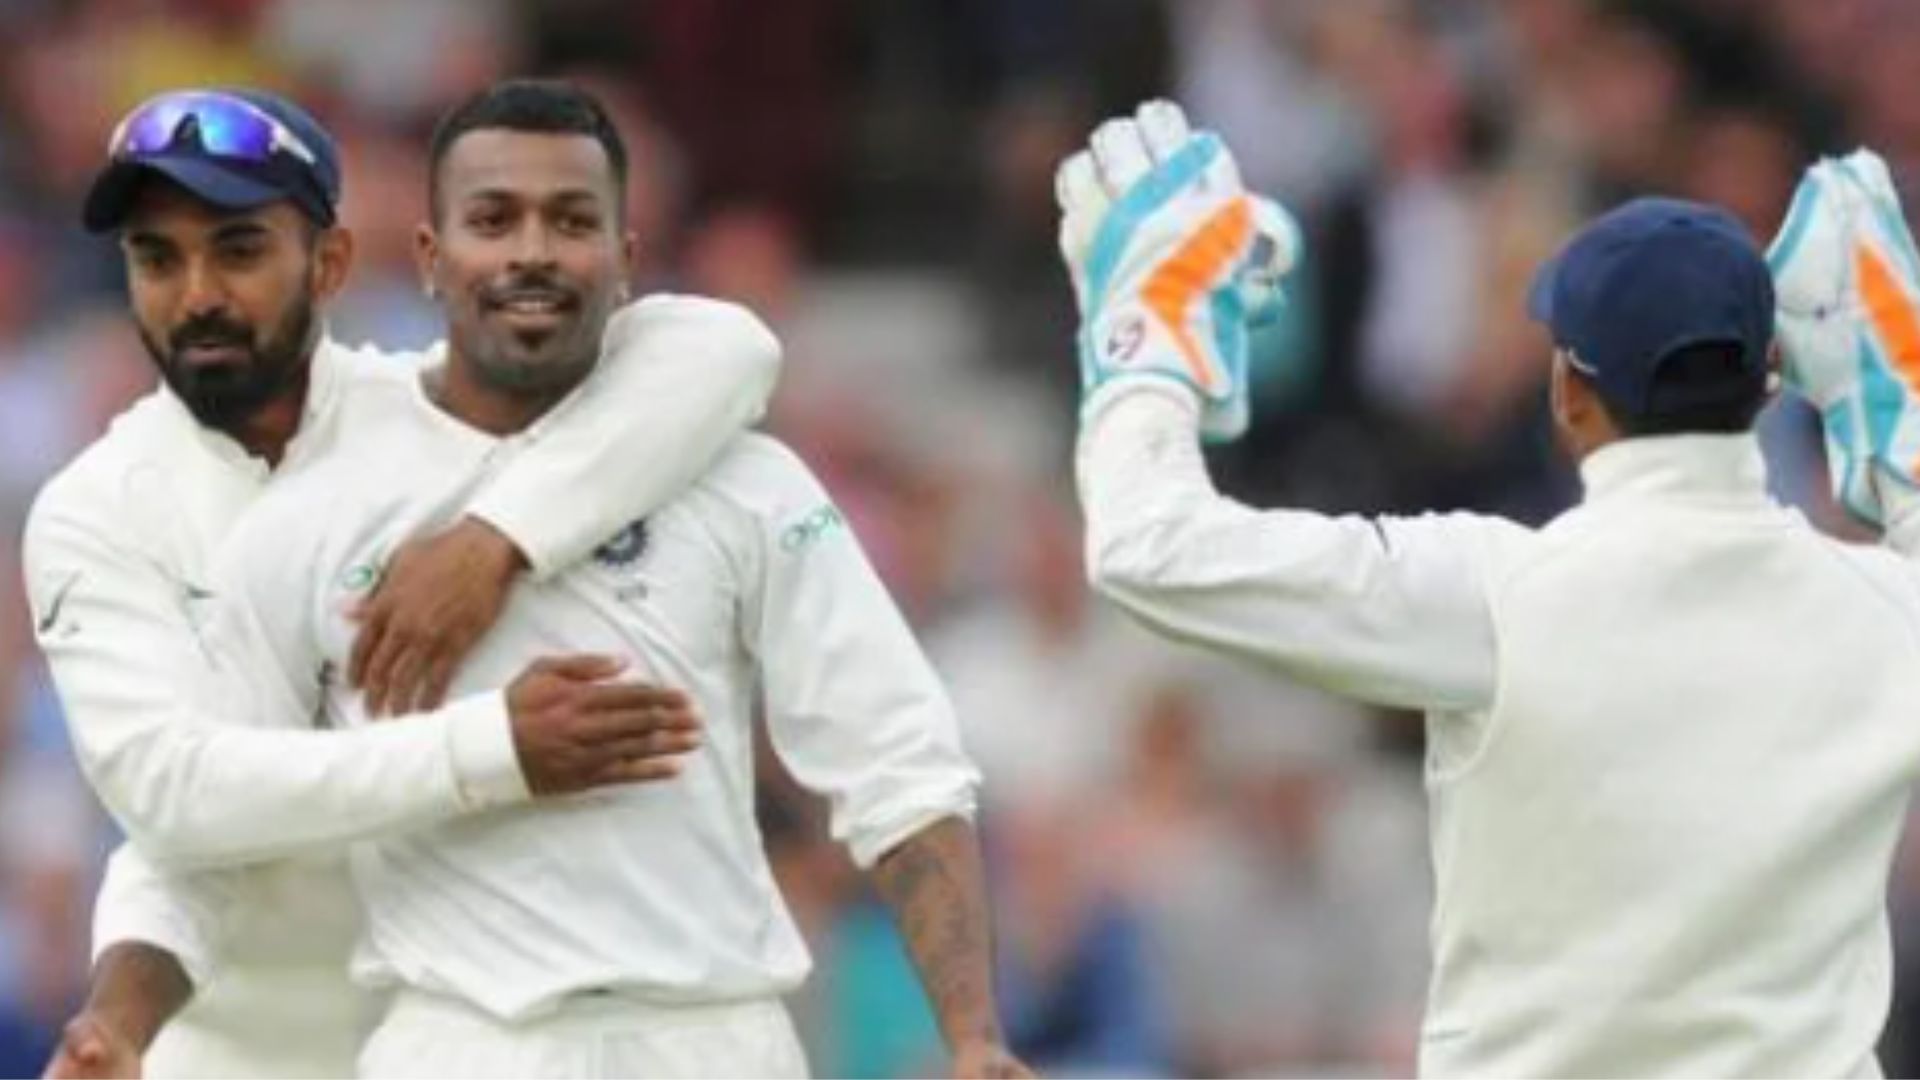 Hardik Pandya celebrates taking one of the wickets in the last Test series he was part of